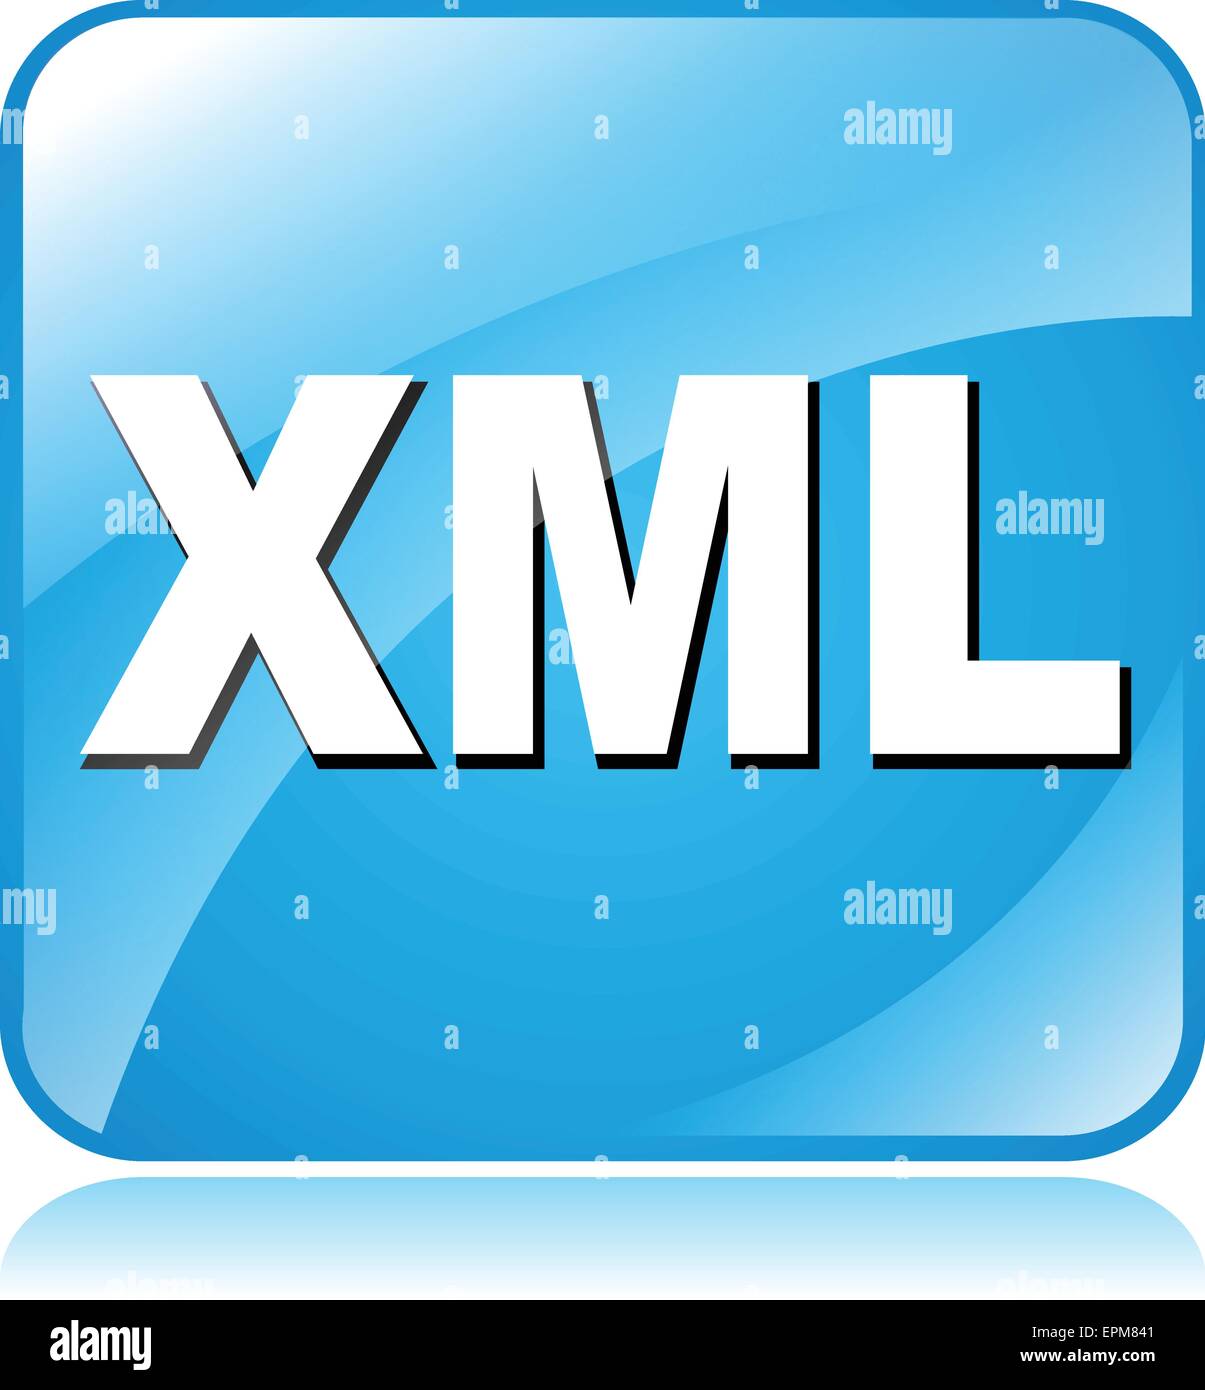 illustration of blue square icon for xml Stock Vector